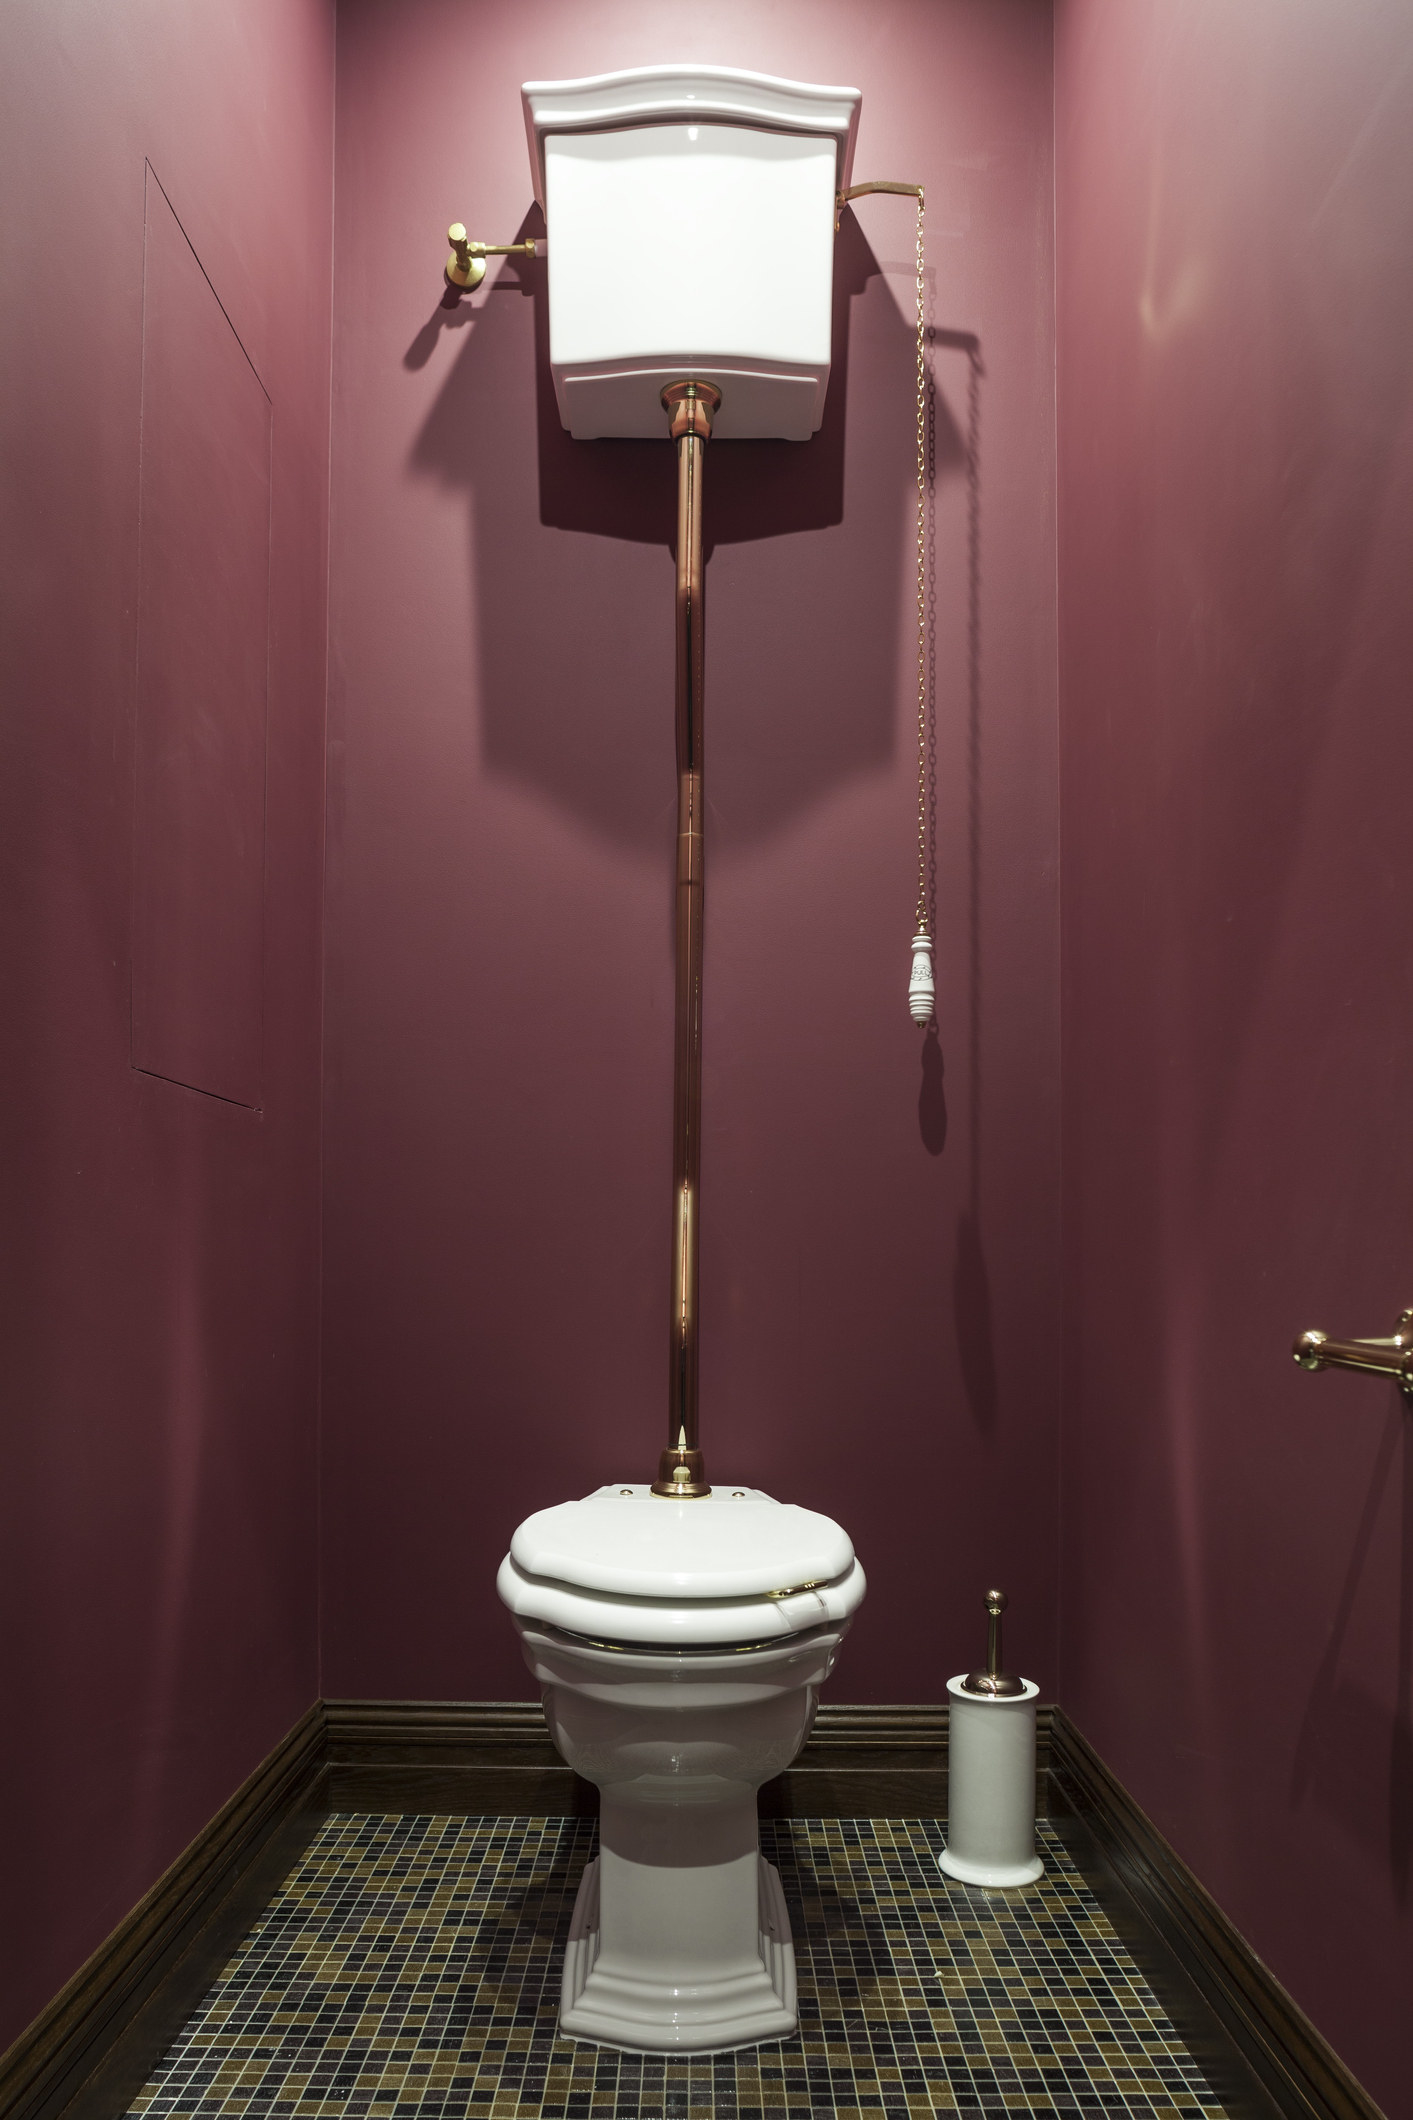 An old fashioned toilet with a pulley.